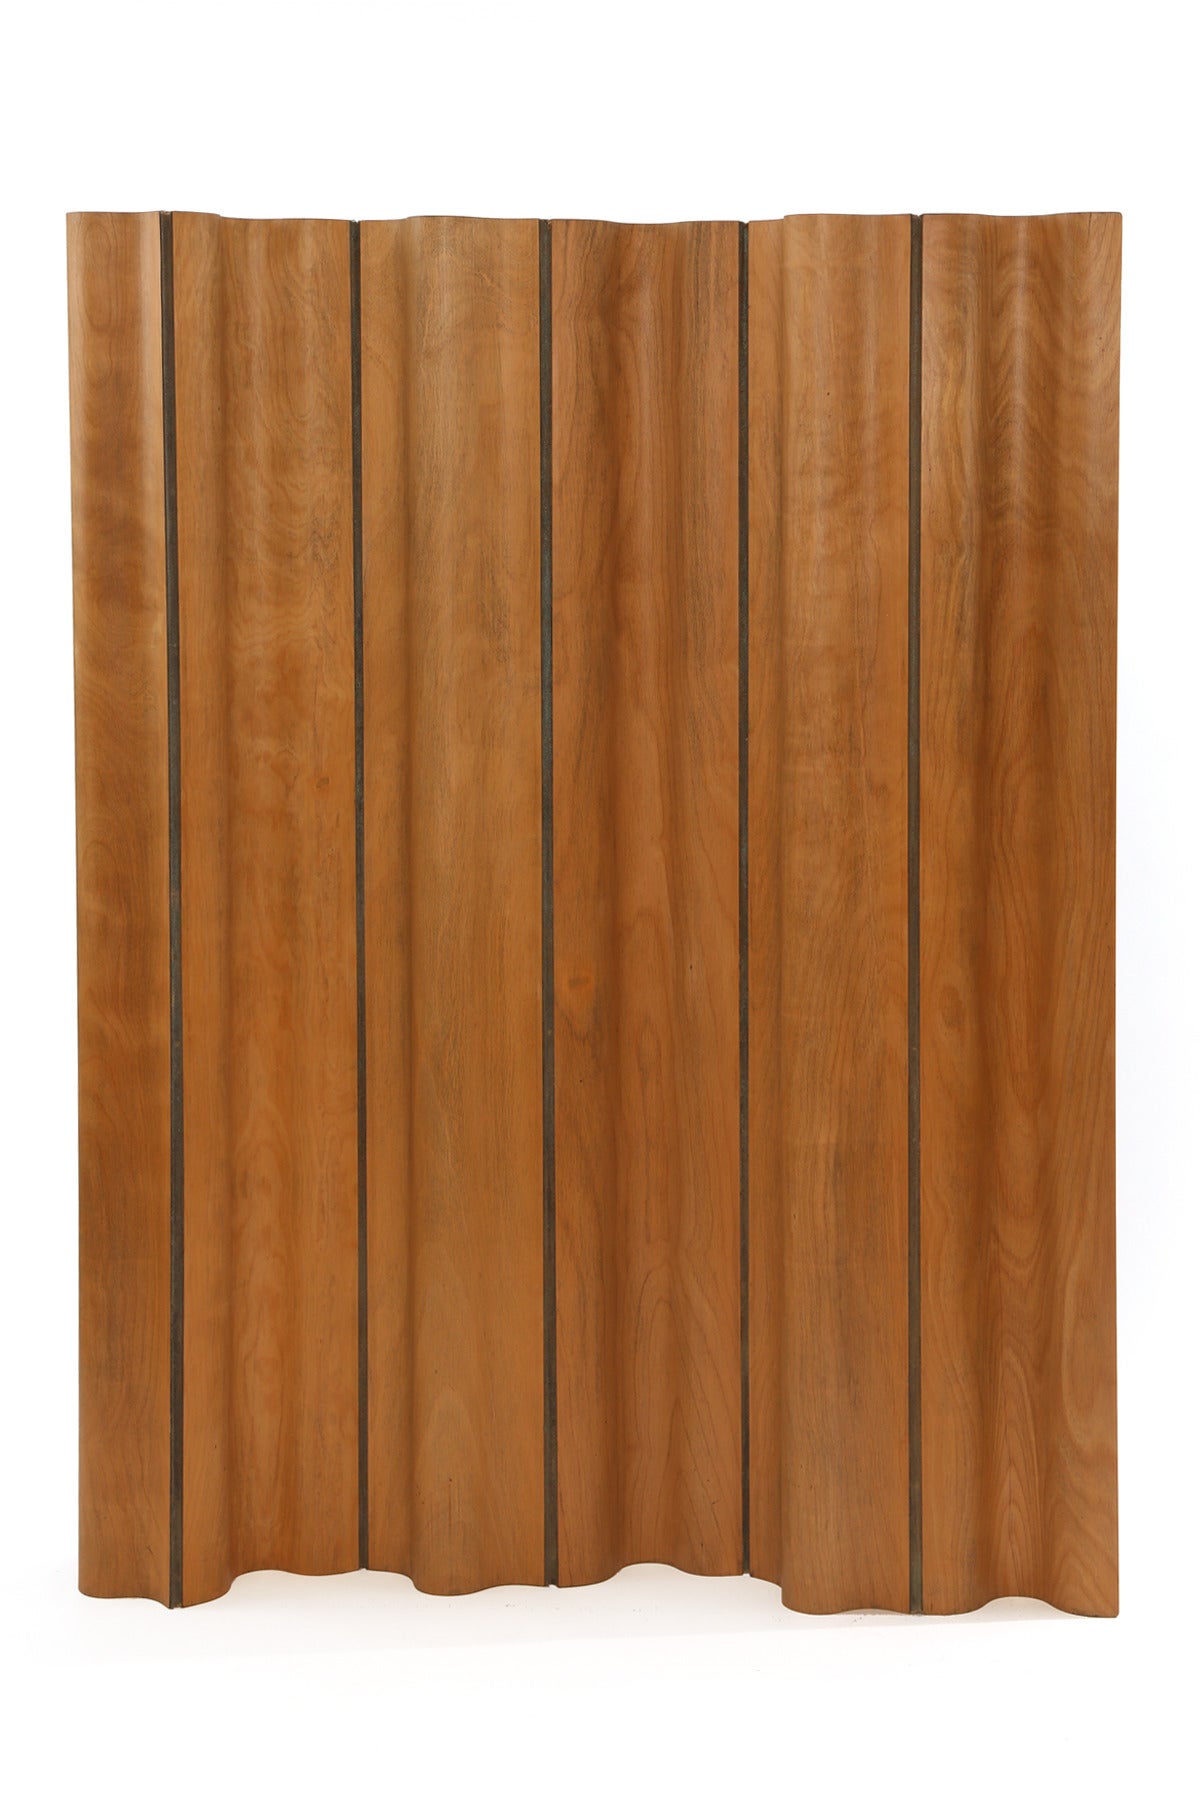 Early Charles and Ray Eames FSW folding screen, circa late 1940s. This six-panel example is hinged in canvas and executed in birch. Has a wonderful patina to the wood and canvas.

Each panel is 9.5